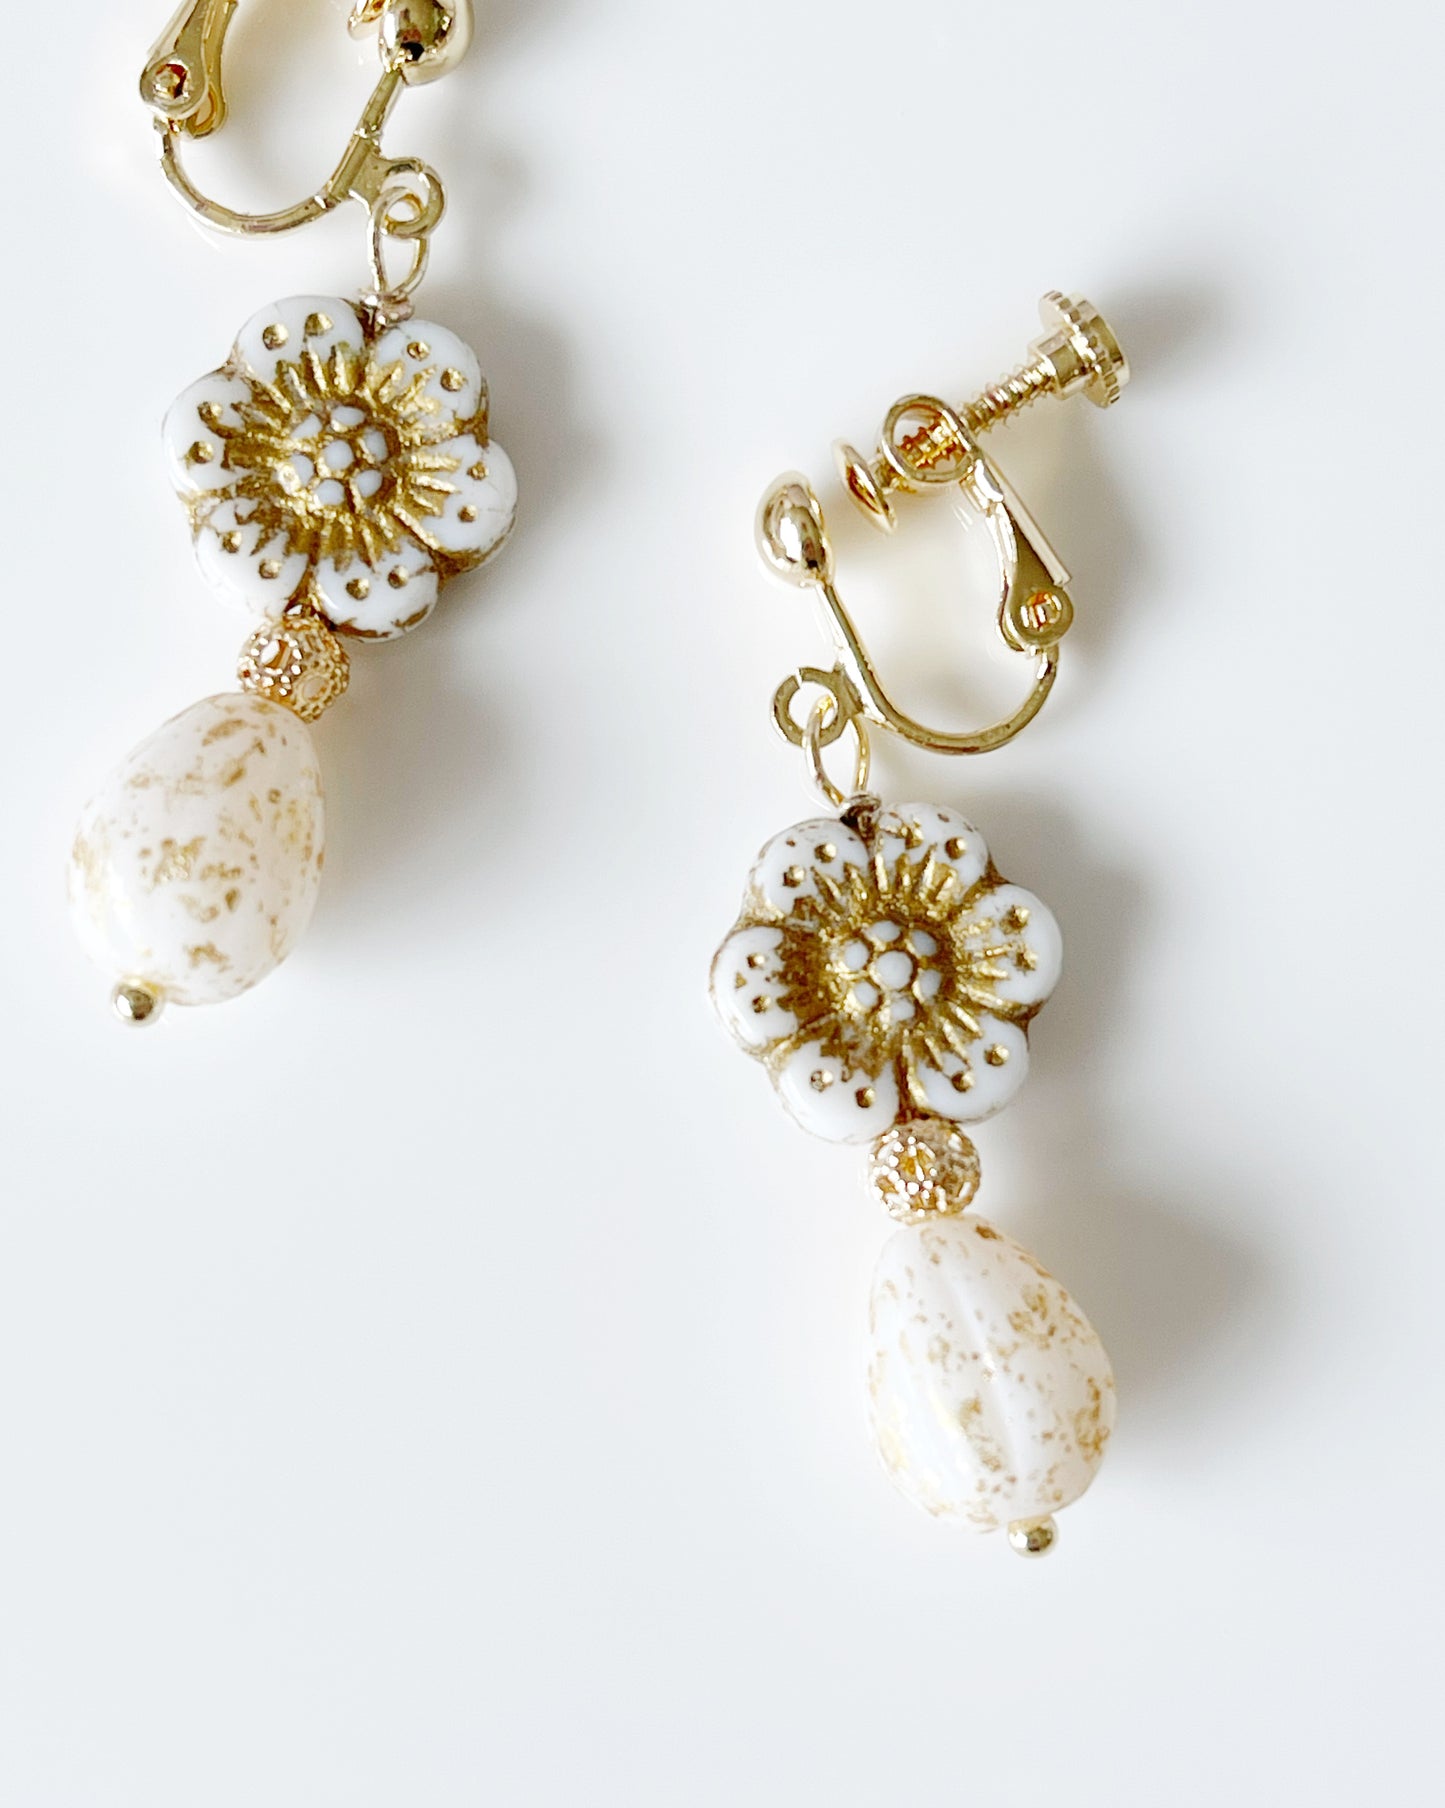 My first wedding heirloom Victorian flowers and tear drop glass earrings in antique white